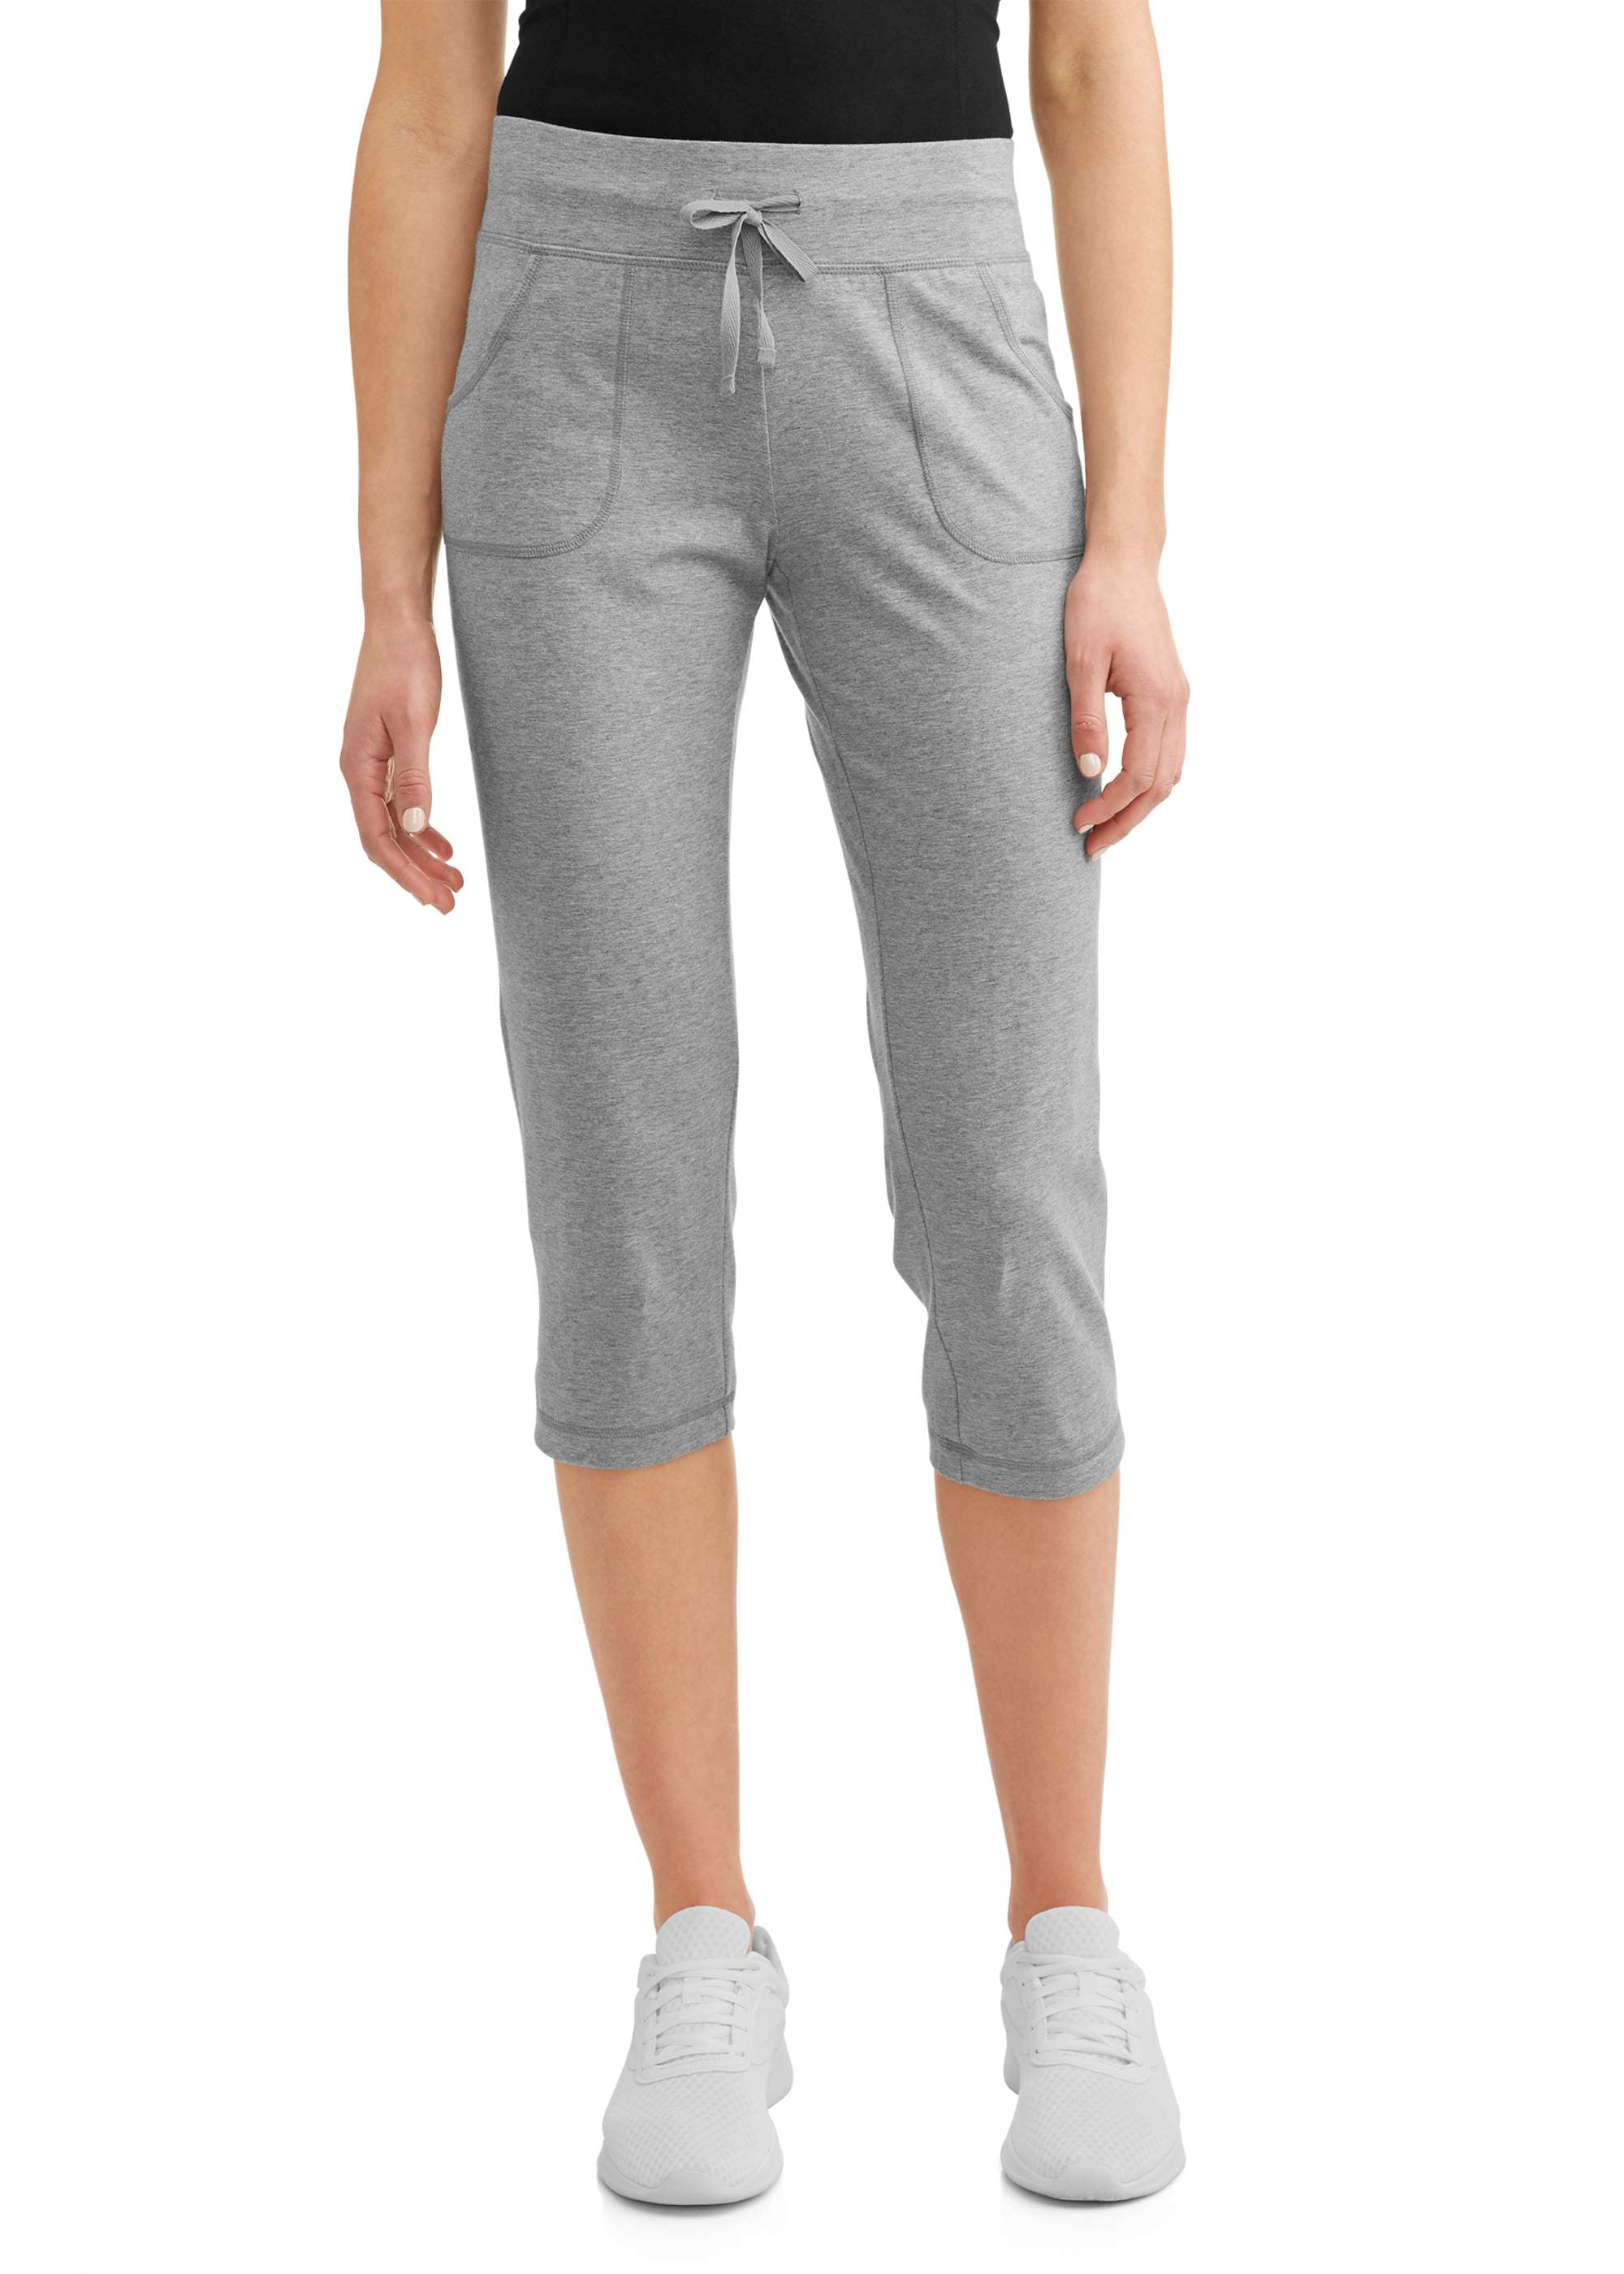 Athletic Works - Athletic Works Womens Athleisure Core -8037